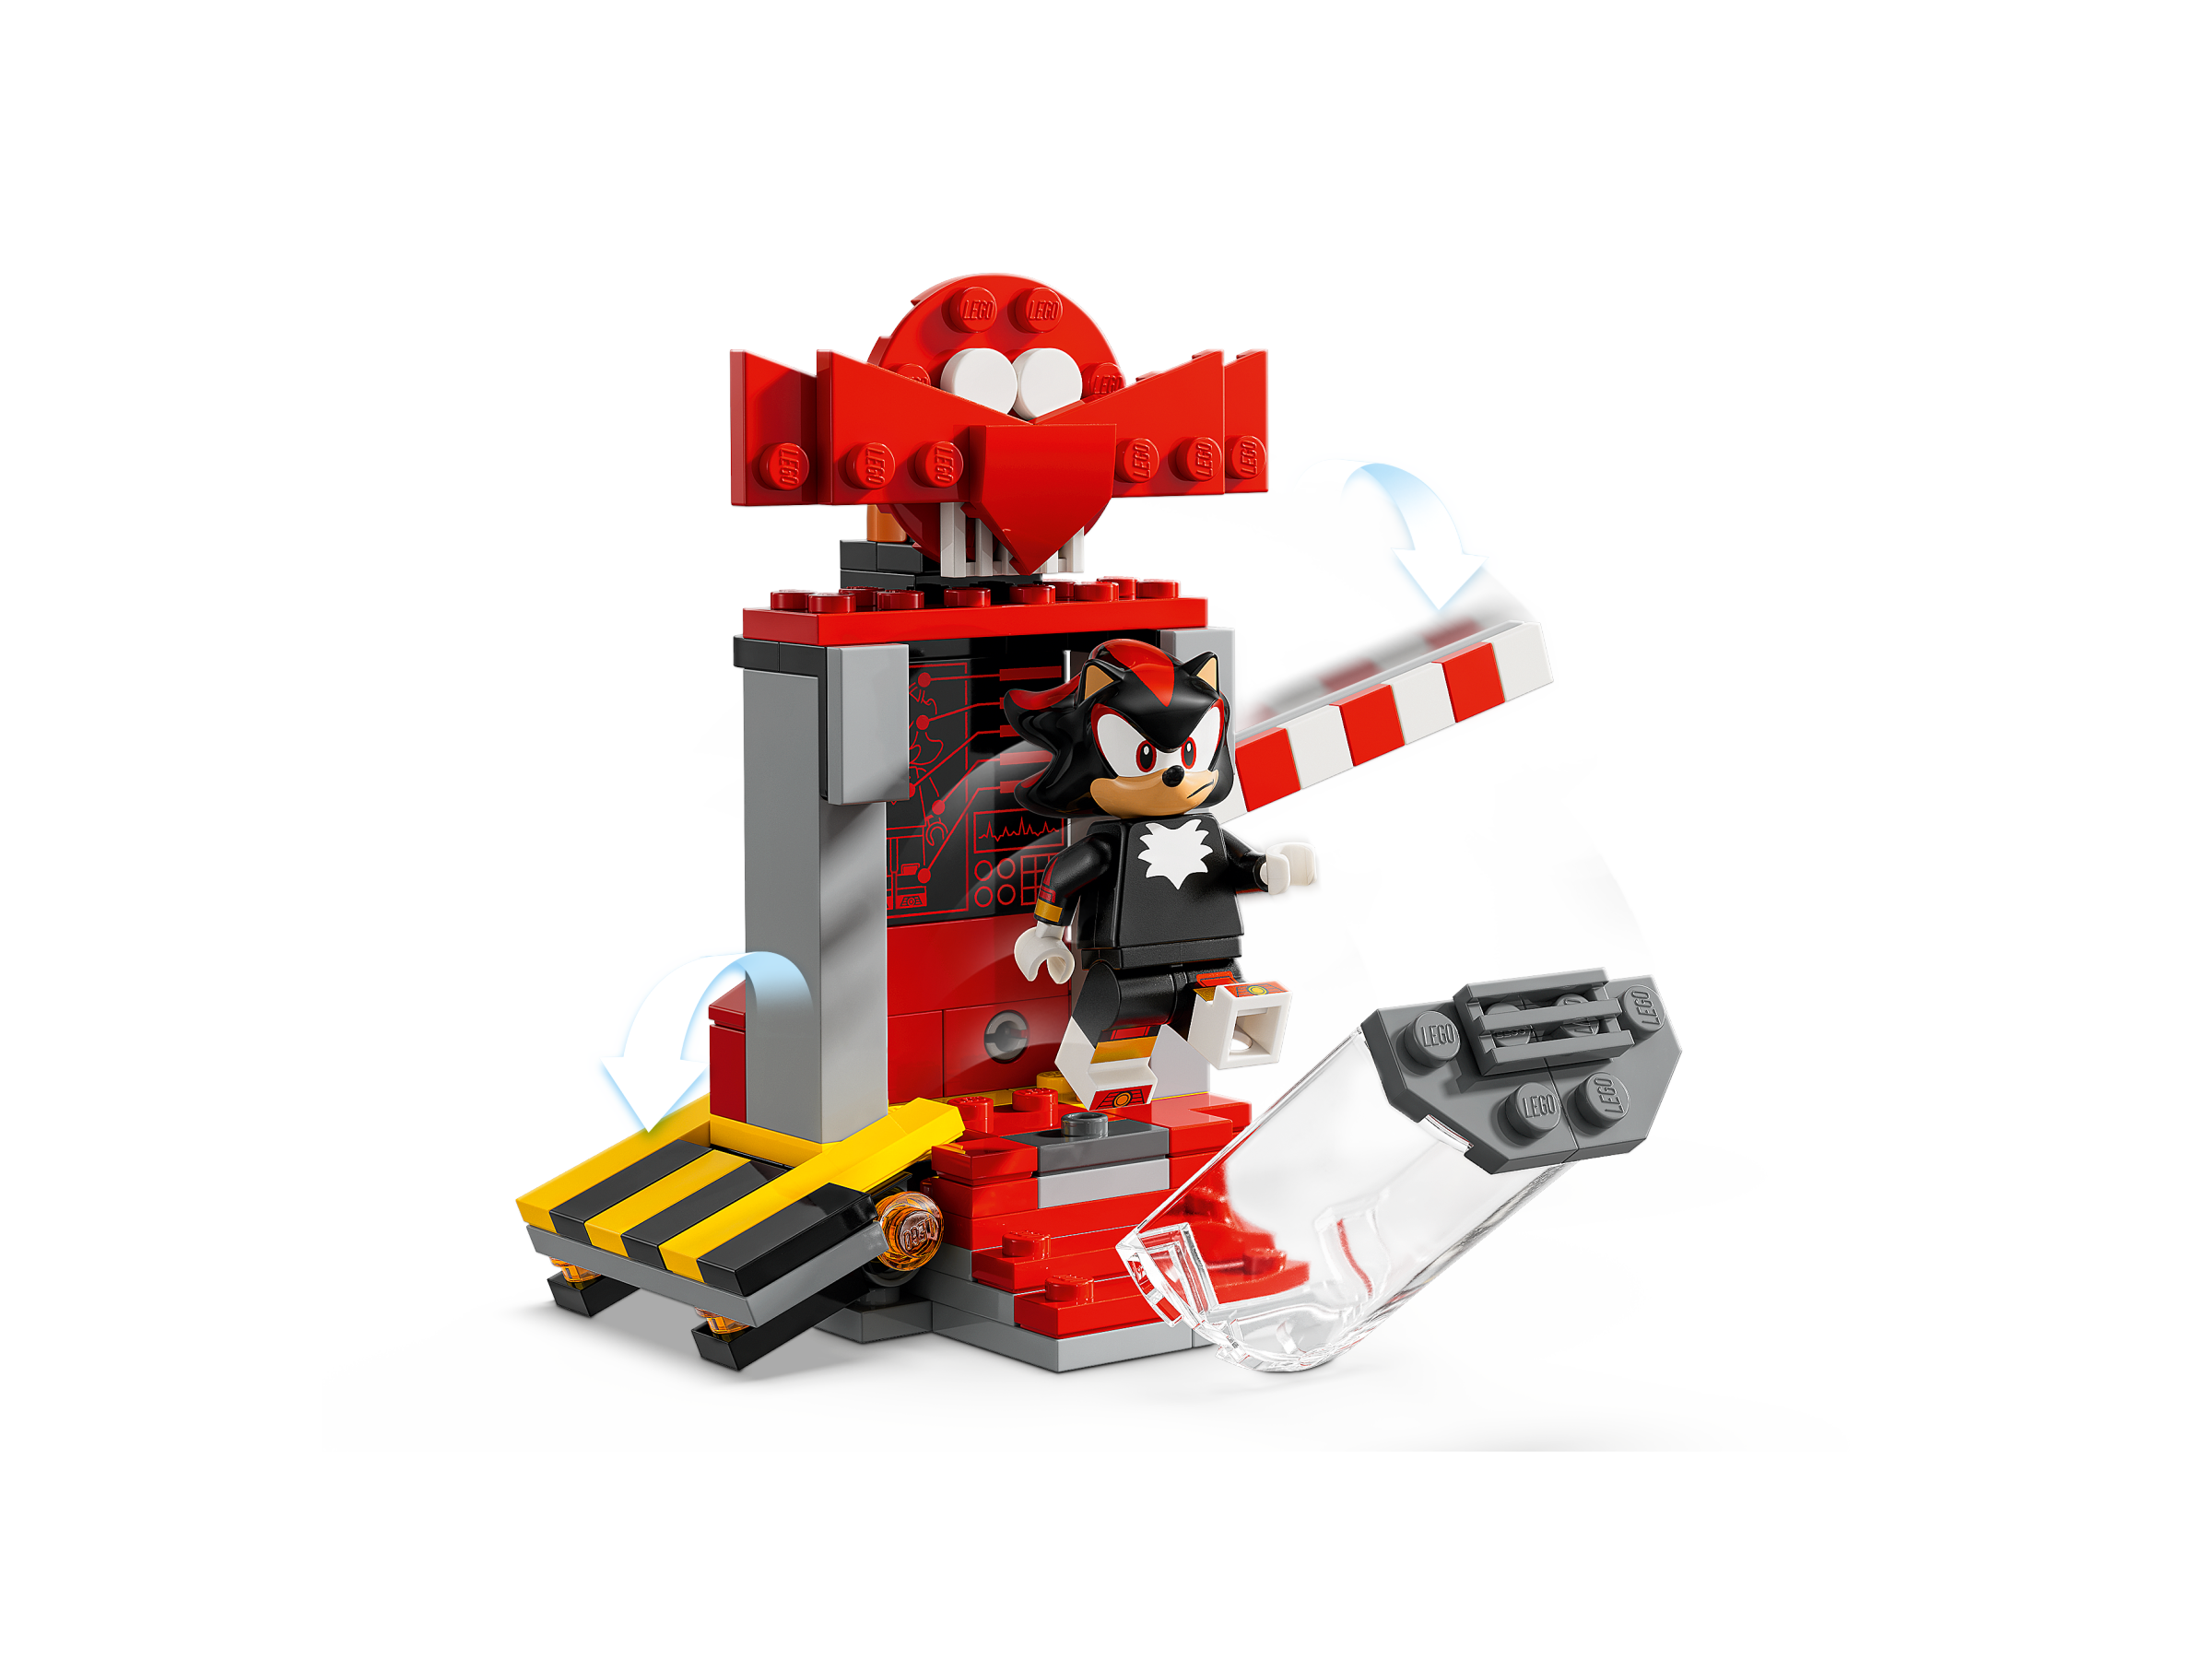 LEGO Sonic the Hedgehog Shadow the Hedgehog Escape Building Set, Gift for  Gamers 76995